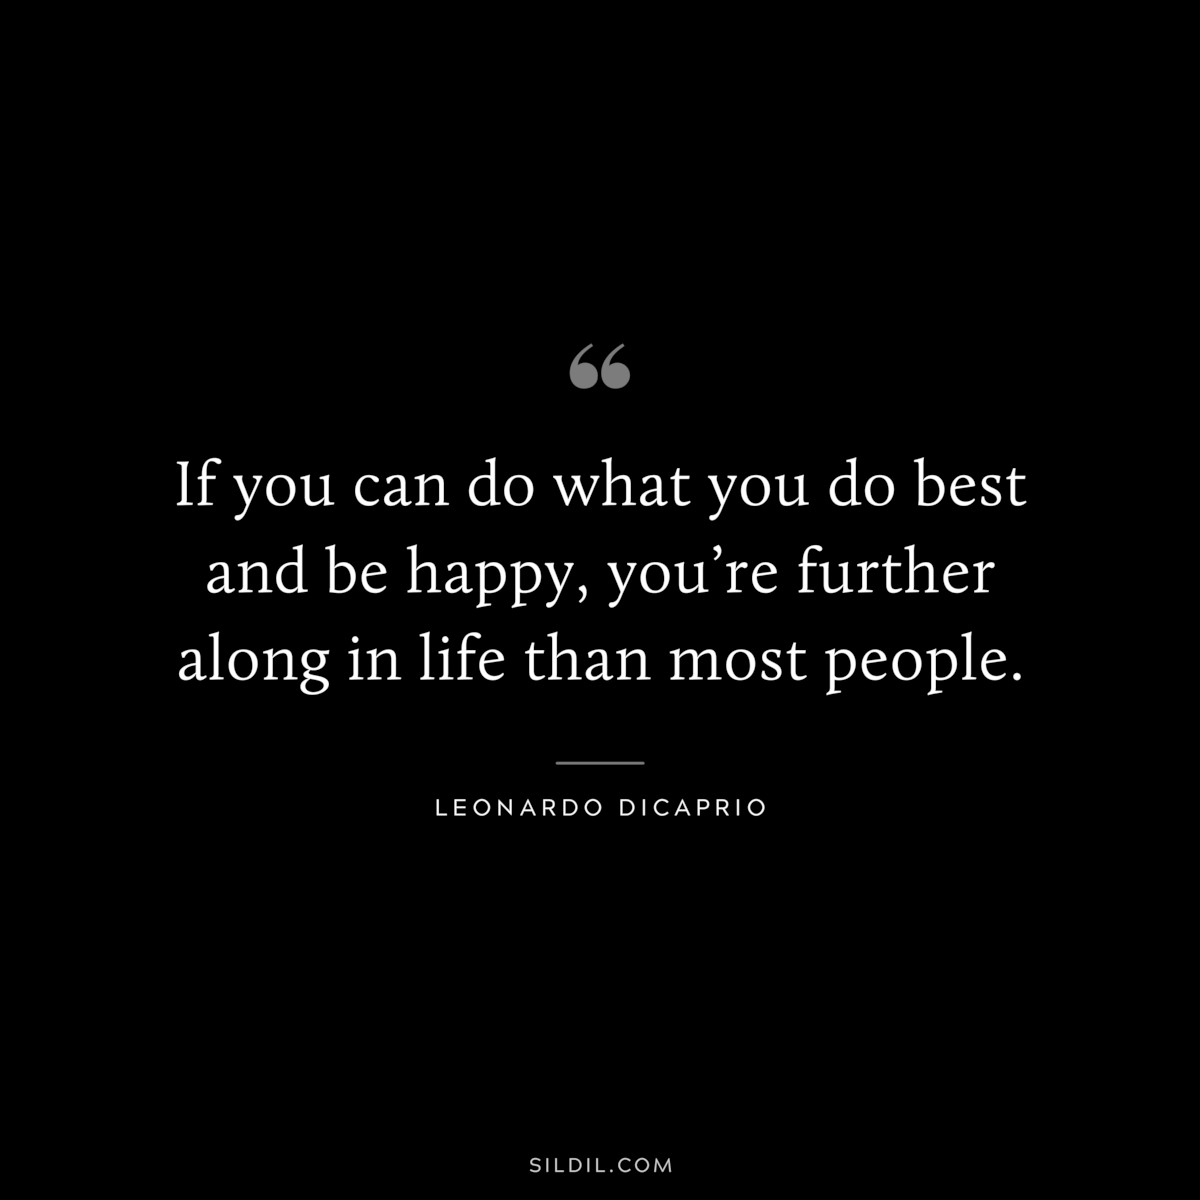 If you can do what you do best and be happy, you’re further along in life than most people. ― Leonardo DiCaprio